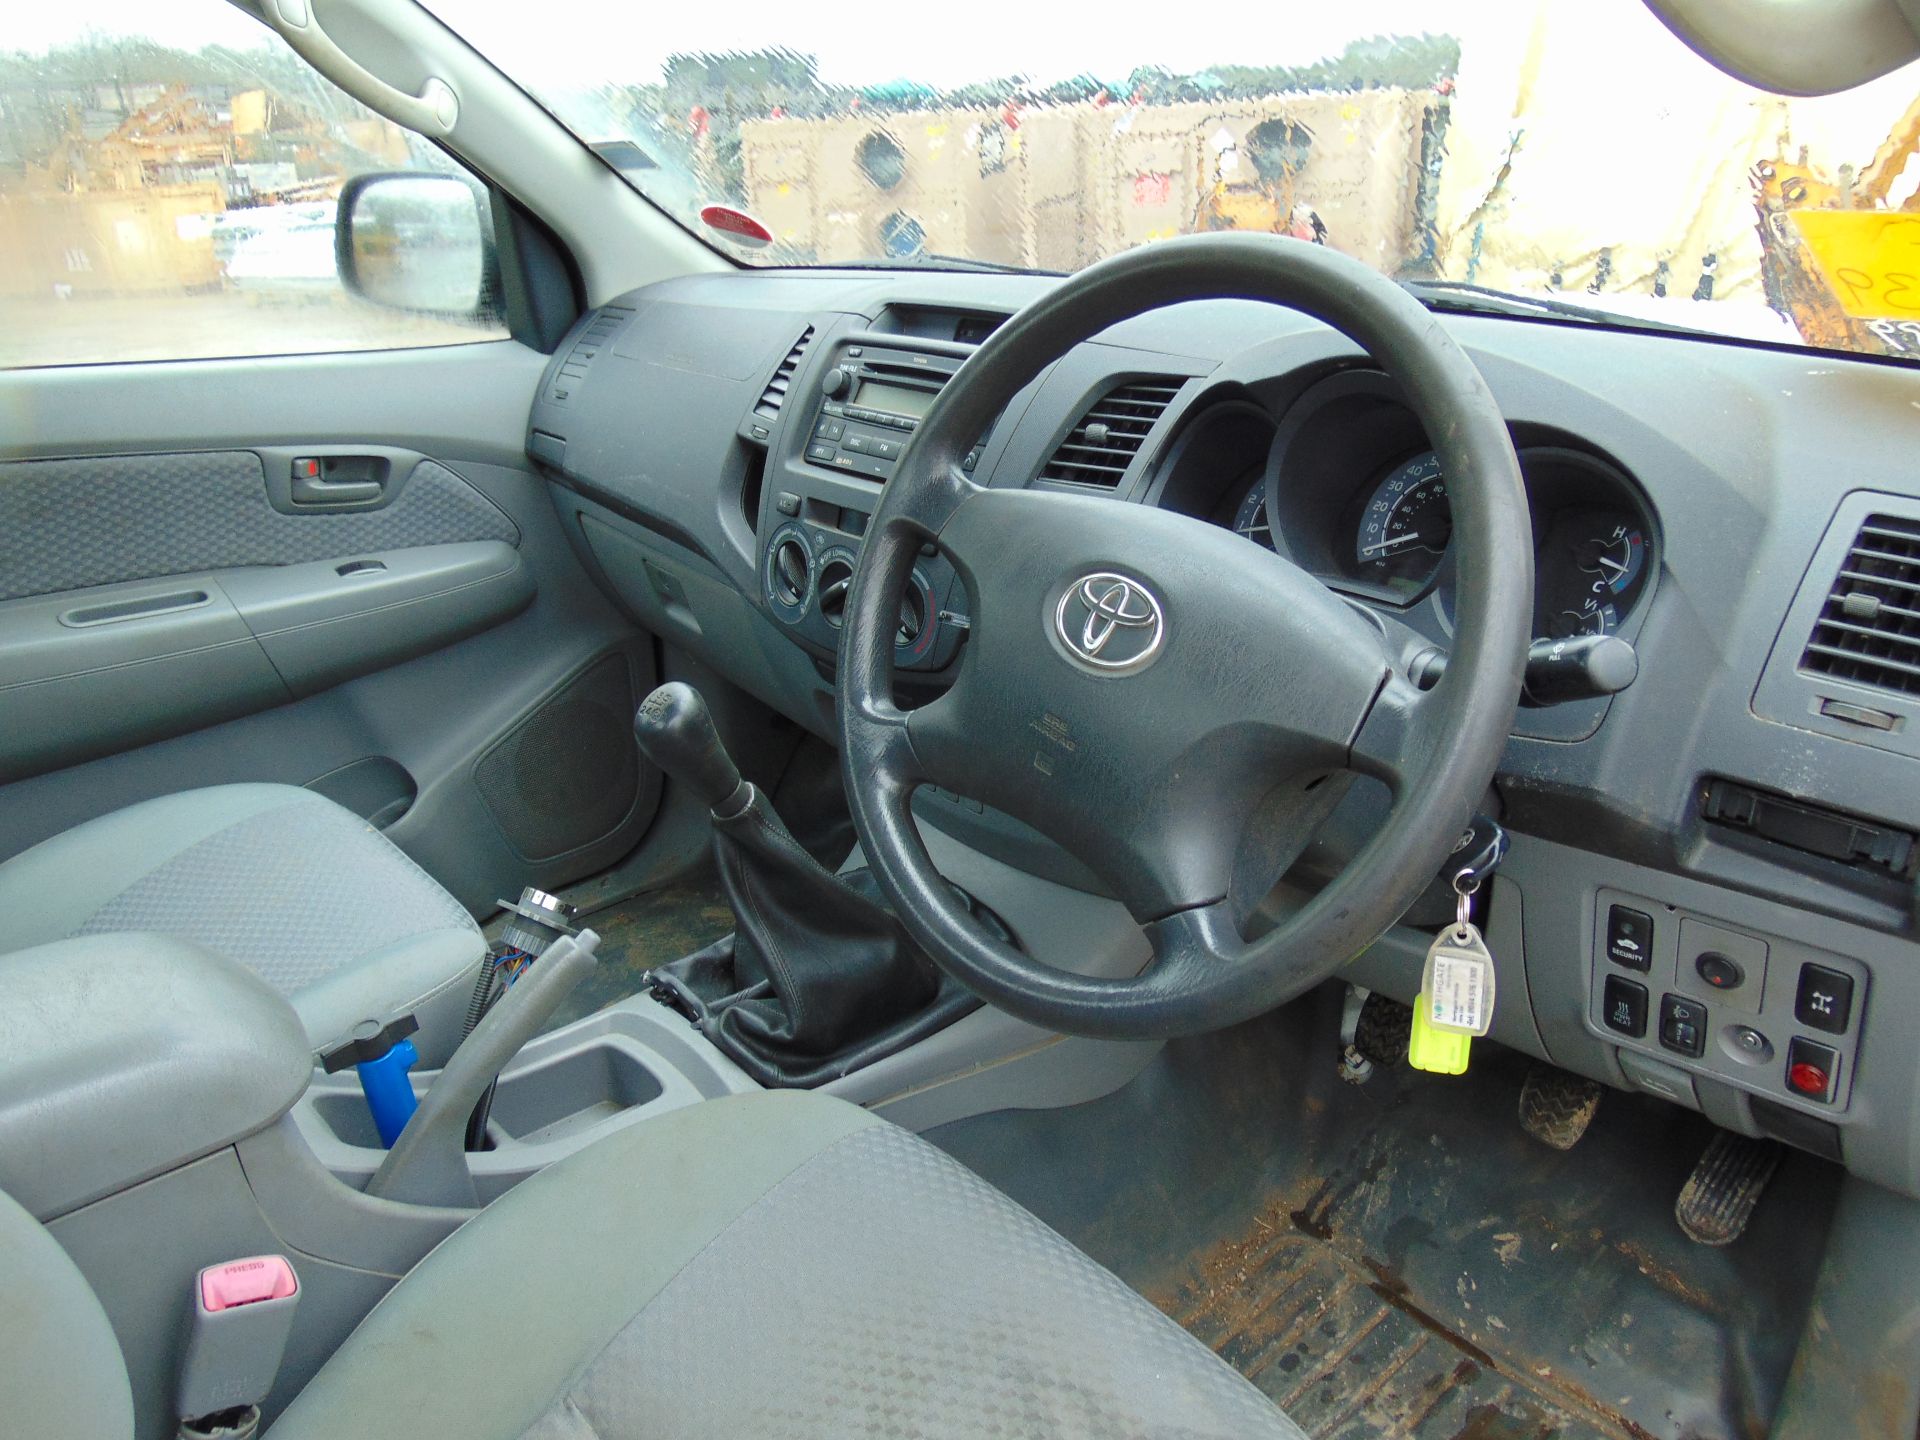 2007 Toyota Hilux 2.5 D4D Pickup - Image 11 of 17